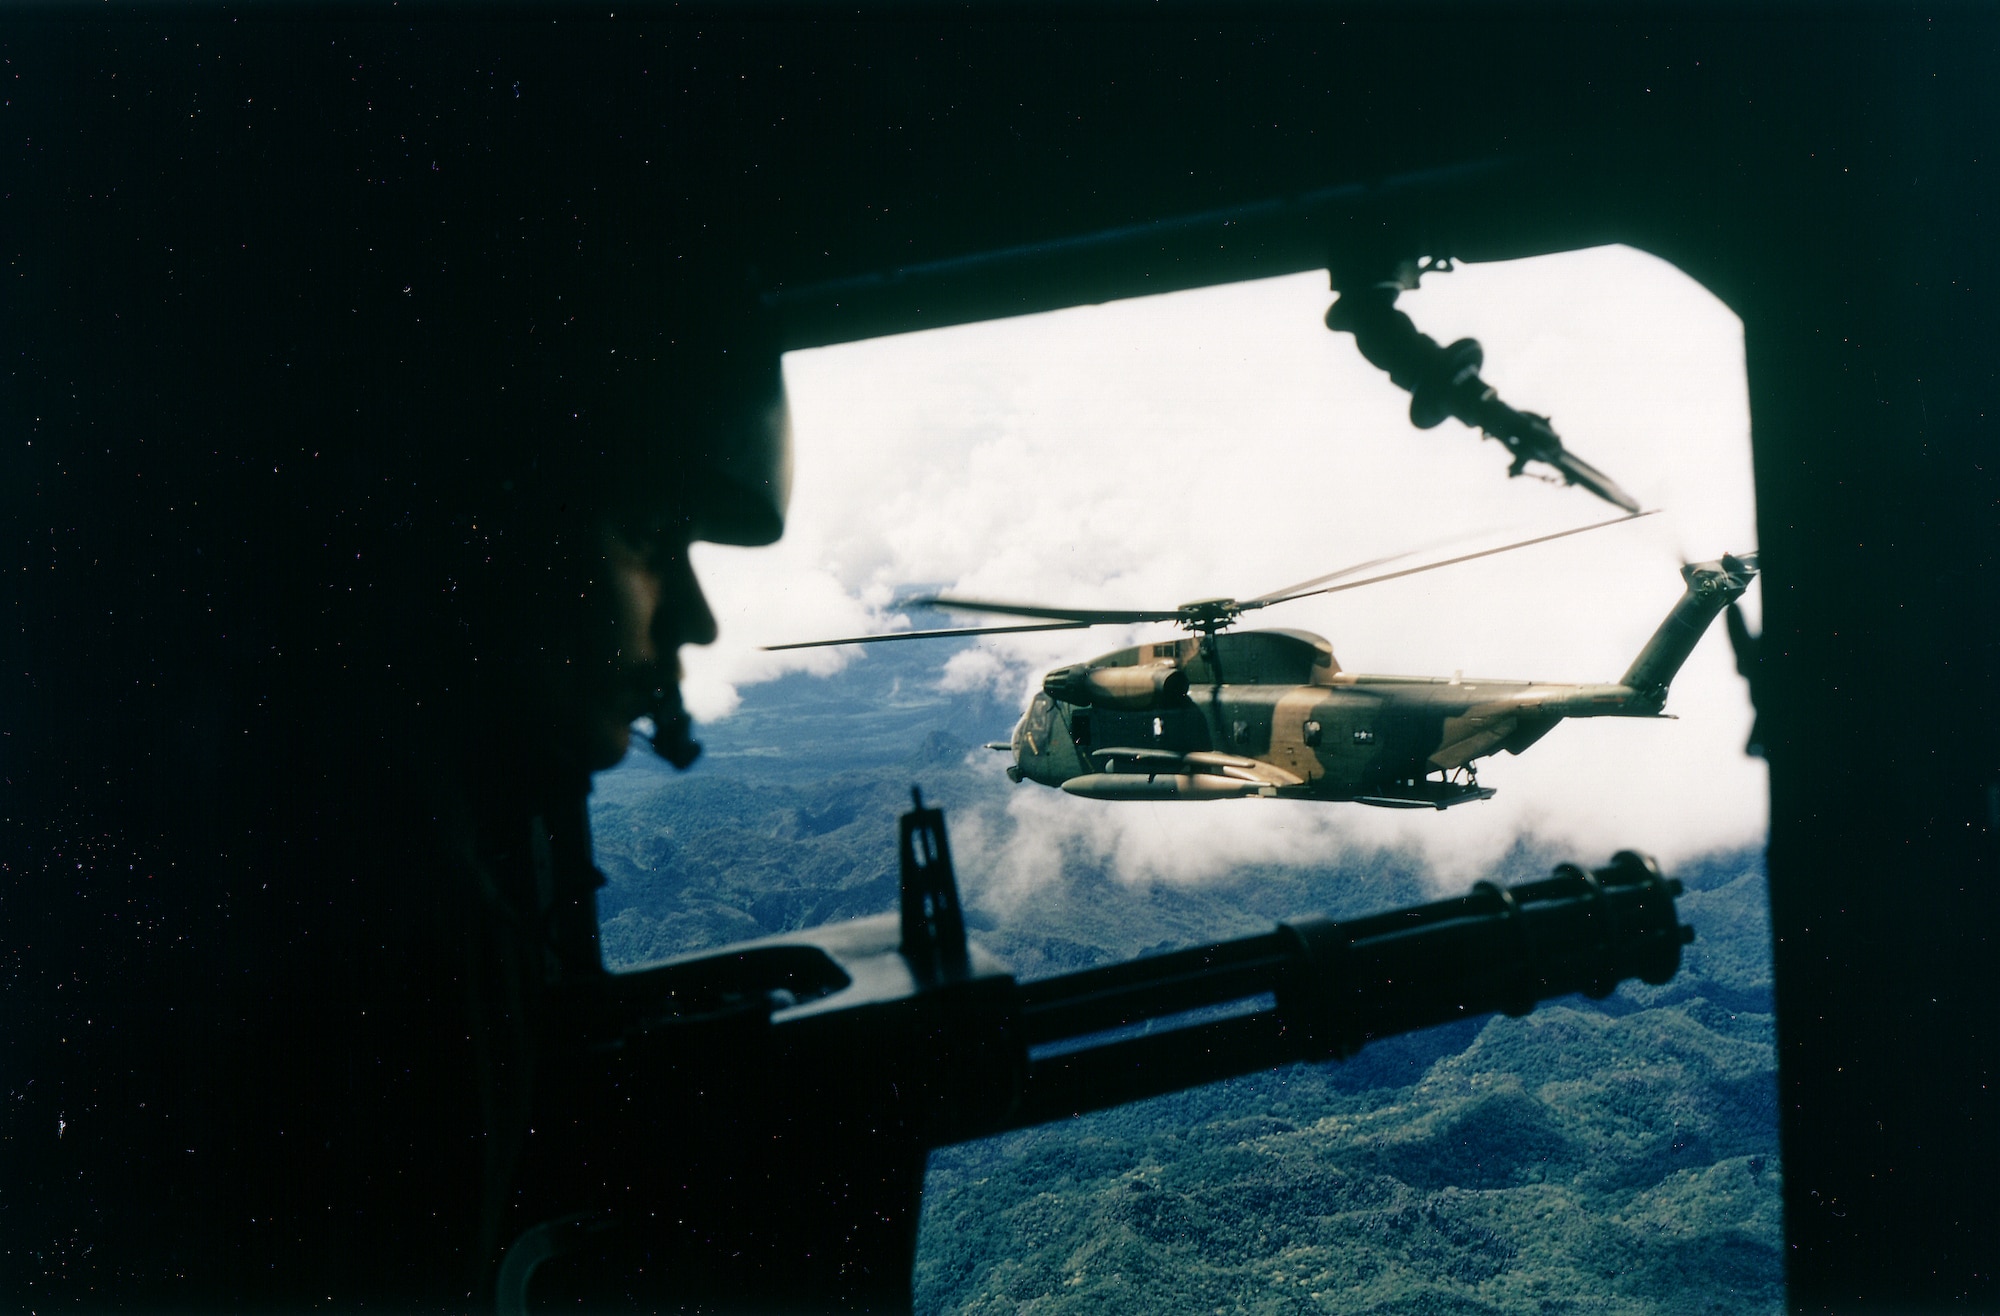 An HH-53 Huskie, a specialized helicopter designed for search and rescue, of the 40th Aerospace Rescue and Recovery Squadron as seen from the gunner's position, in Vietnam, October 1972. (U.S. Air Force photo by Ken Hackman)